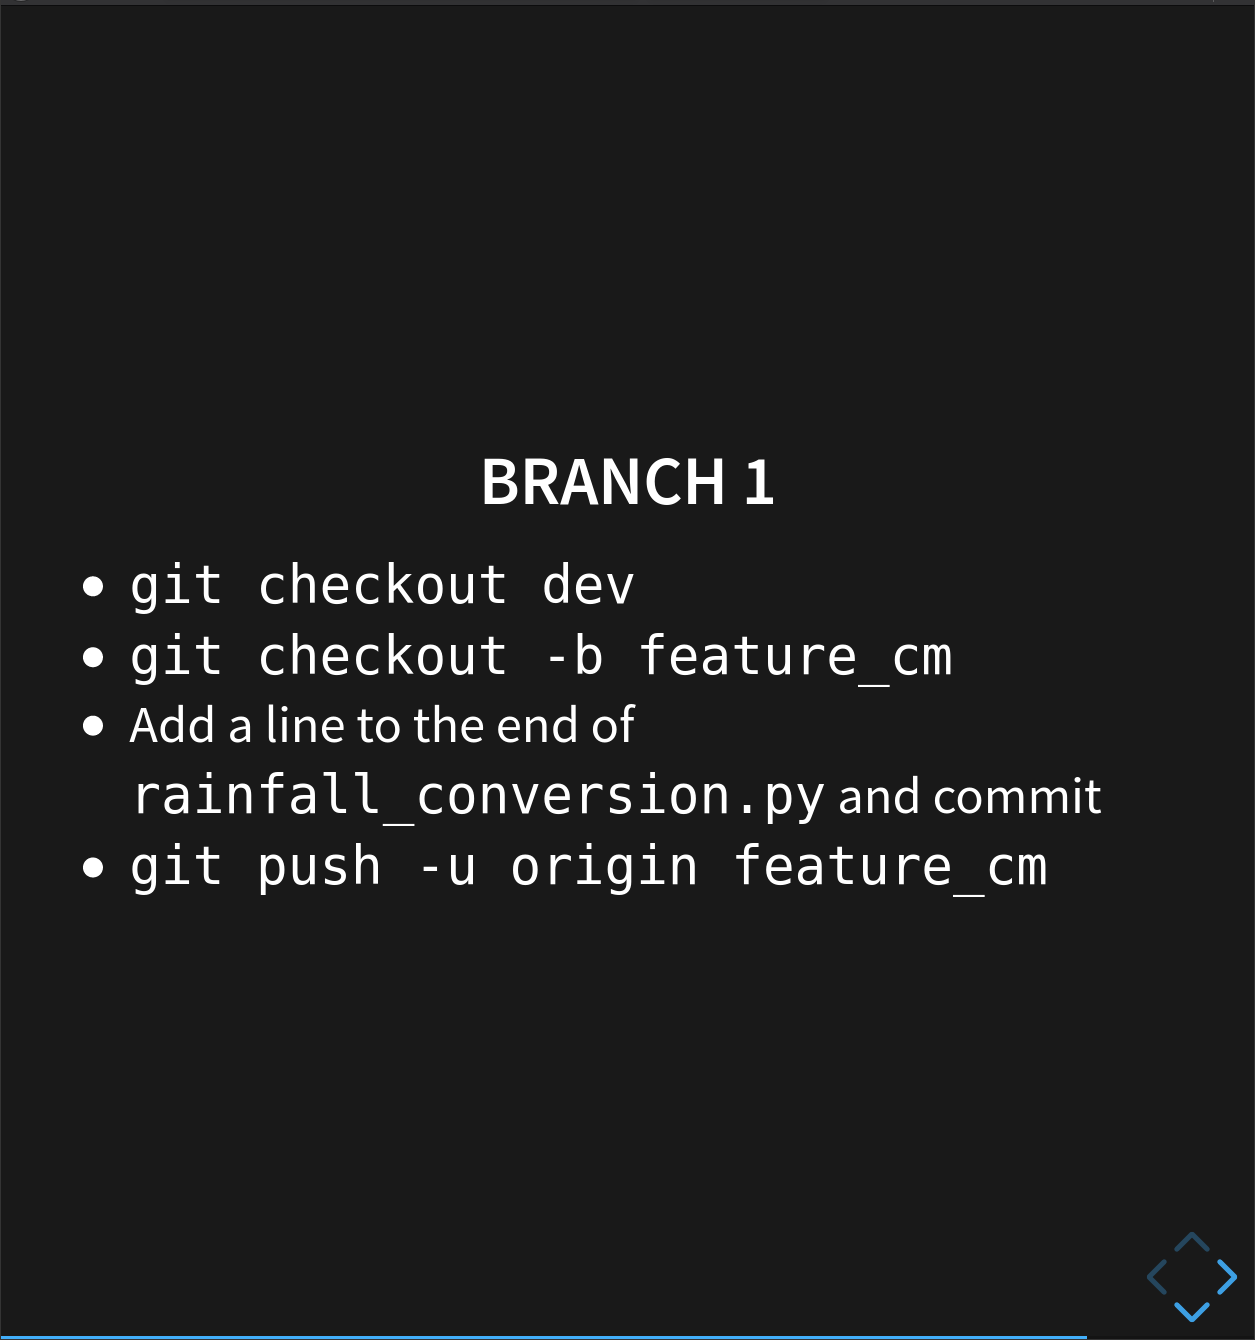 First branch changes